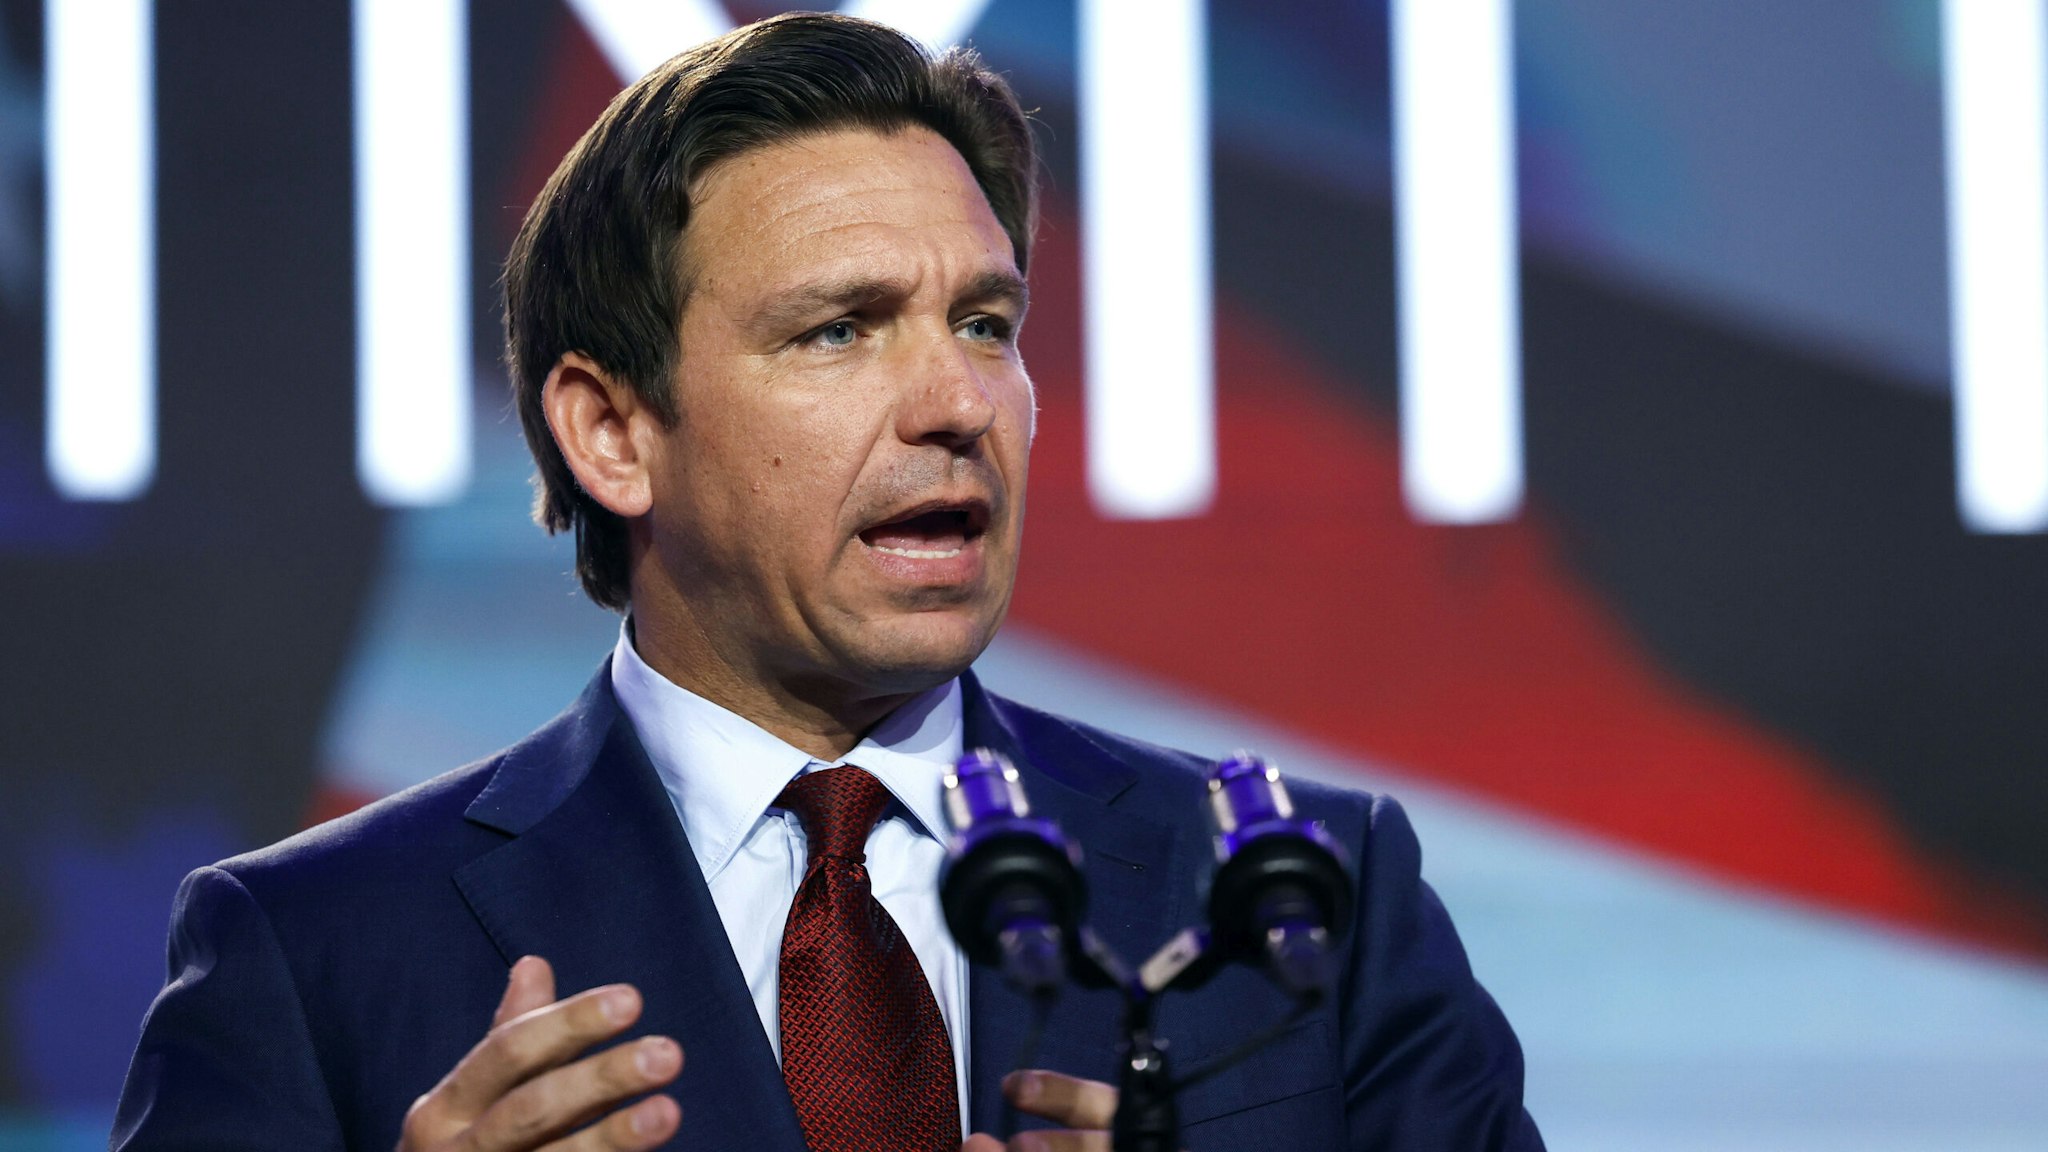 WASHINGTON, DC - SEPTEMBER 15: Republican presidential candidate Florida Governor Ron DeSantis speaks at the Pray Vote Stand Summit at the Omni Shoreham Hotel on September 15, 2023 in Washington, DC. The summit featured remarks from multiple 2024 Republican Presidential candidates making their case to the conservative audience members.